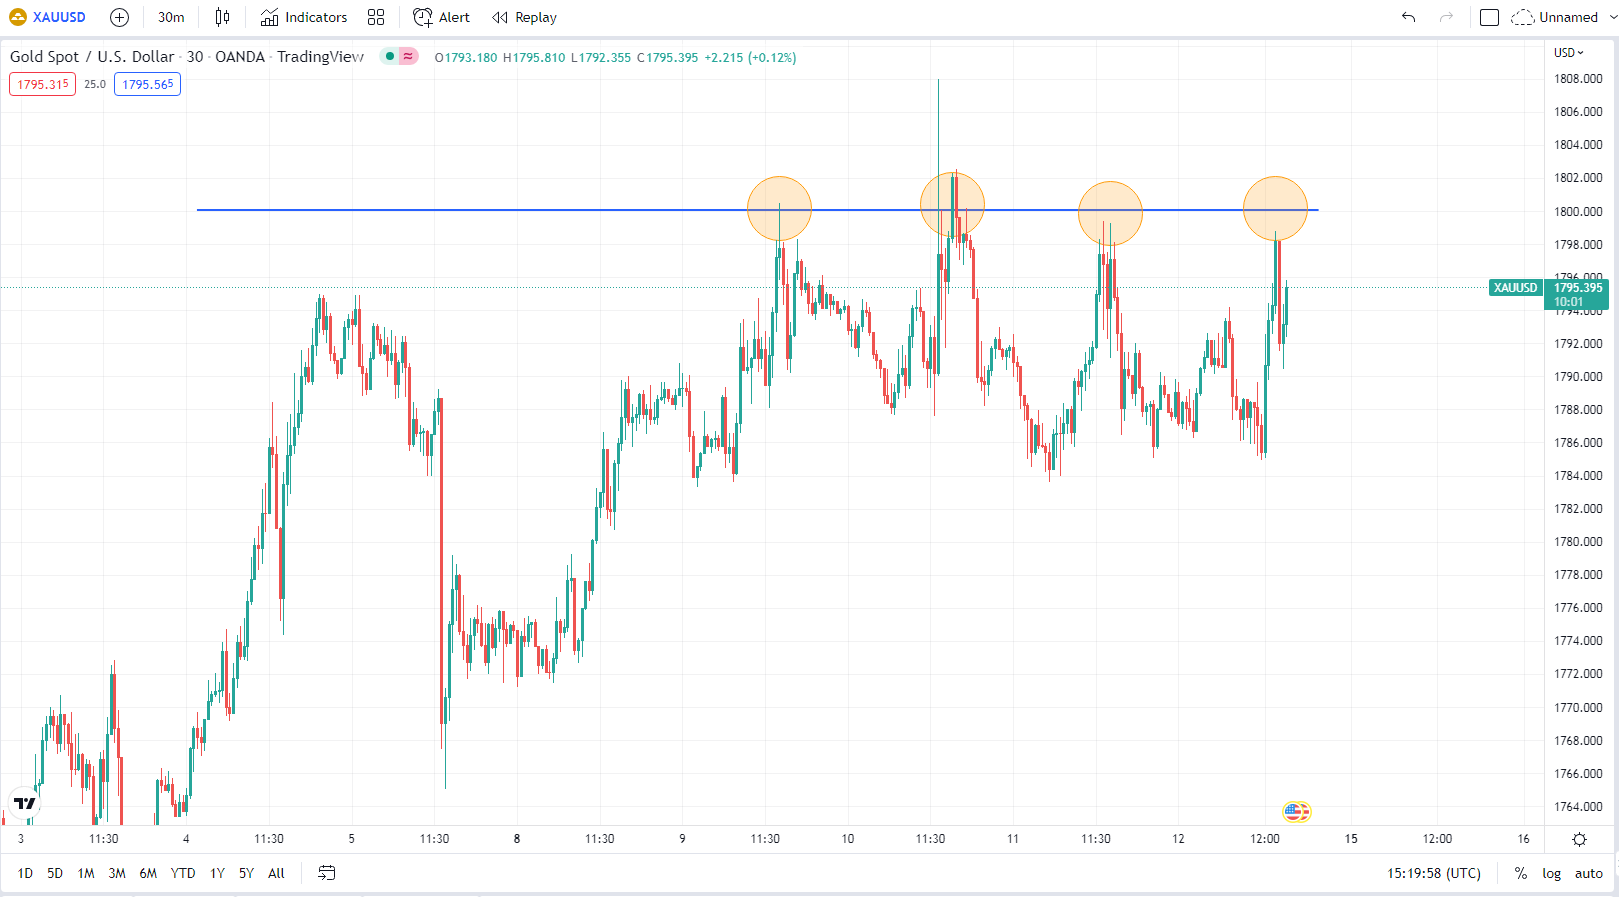 30 minutes chart of XAU/USD (Gold Spot). Resistance at the level 1800$. Source: tradingview.com